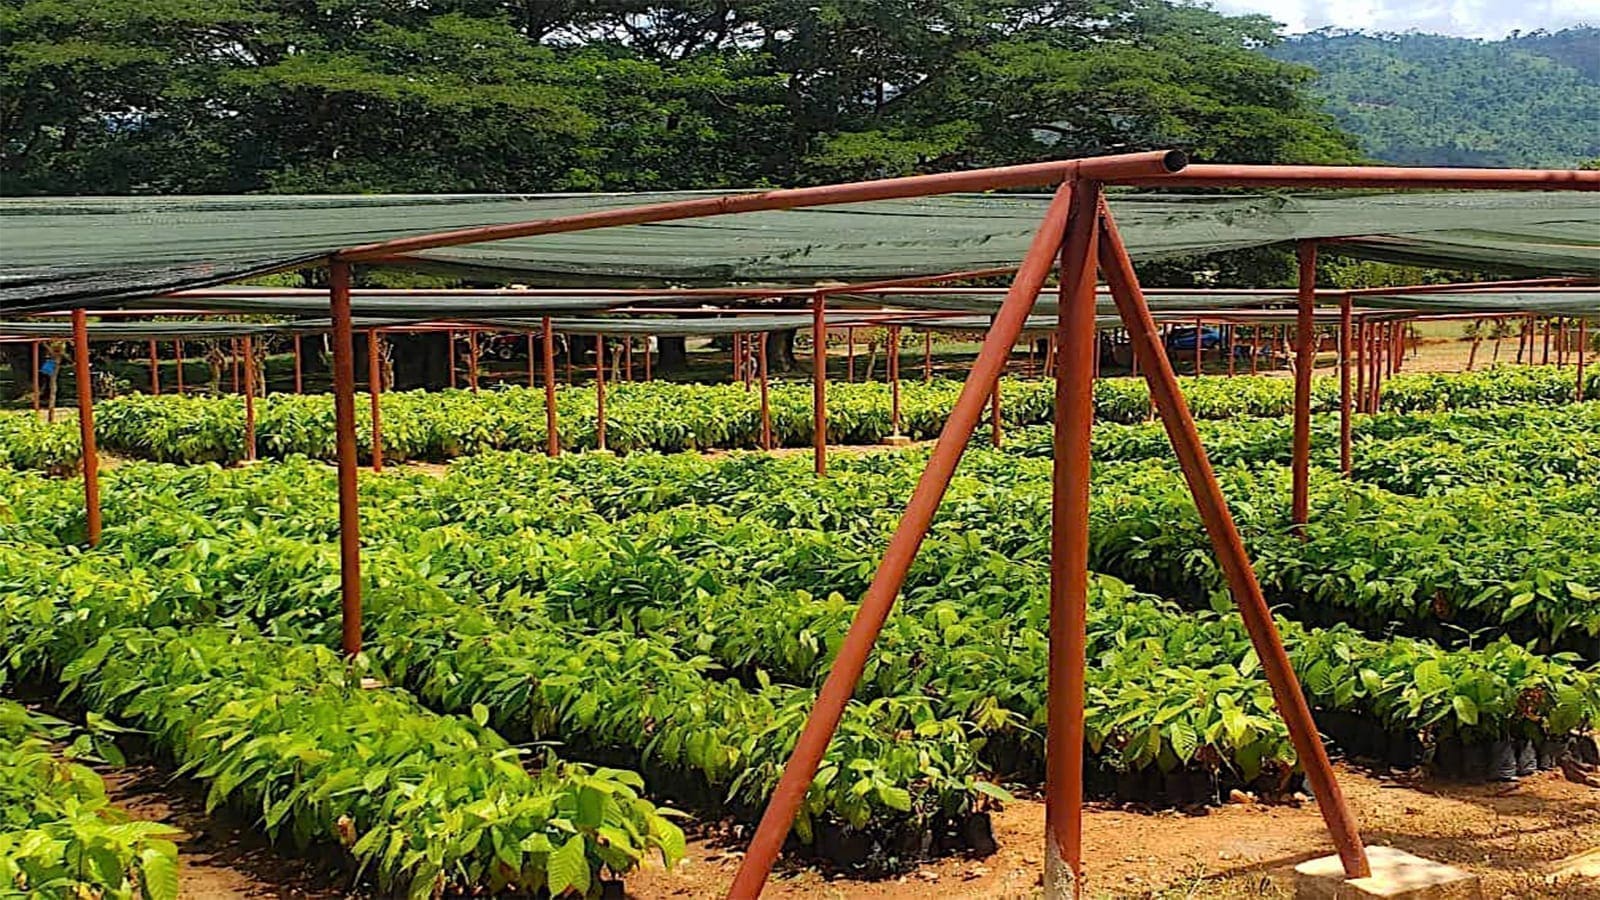 Ghana COCOBOD adopts sustainable cocoa seedlings raising techniques, protects environment